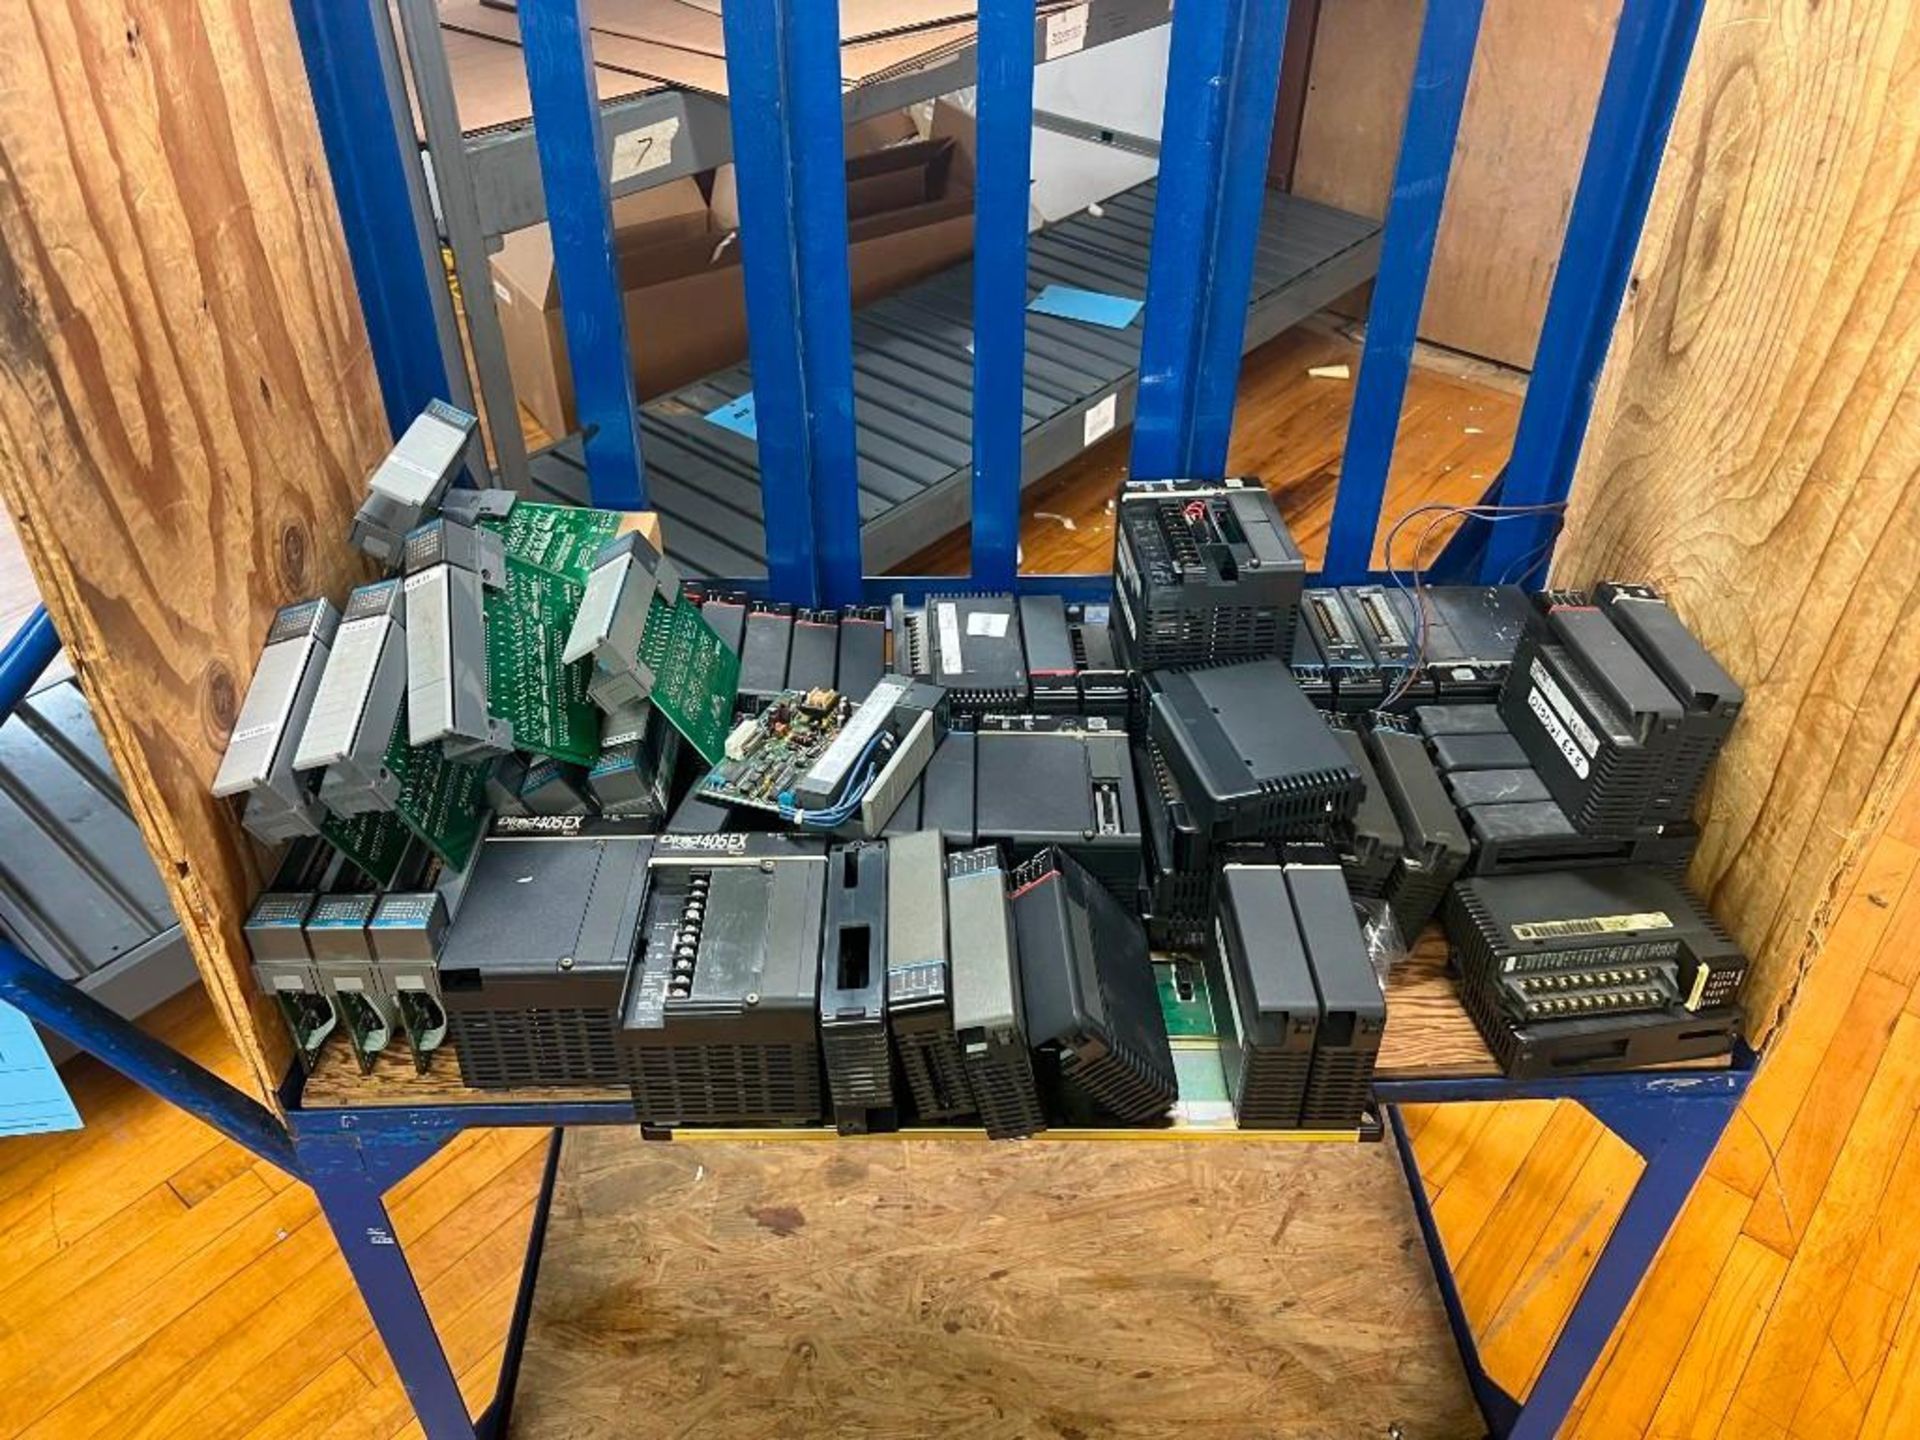 CONTENTS OF CART (CART NOT INCLUDED) MOSTLY USED PLC COMPONENTS (SOME NEW)